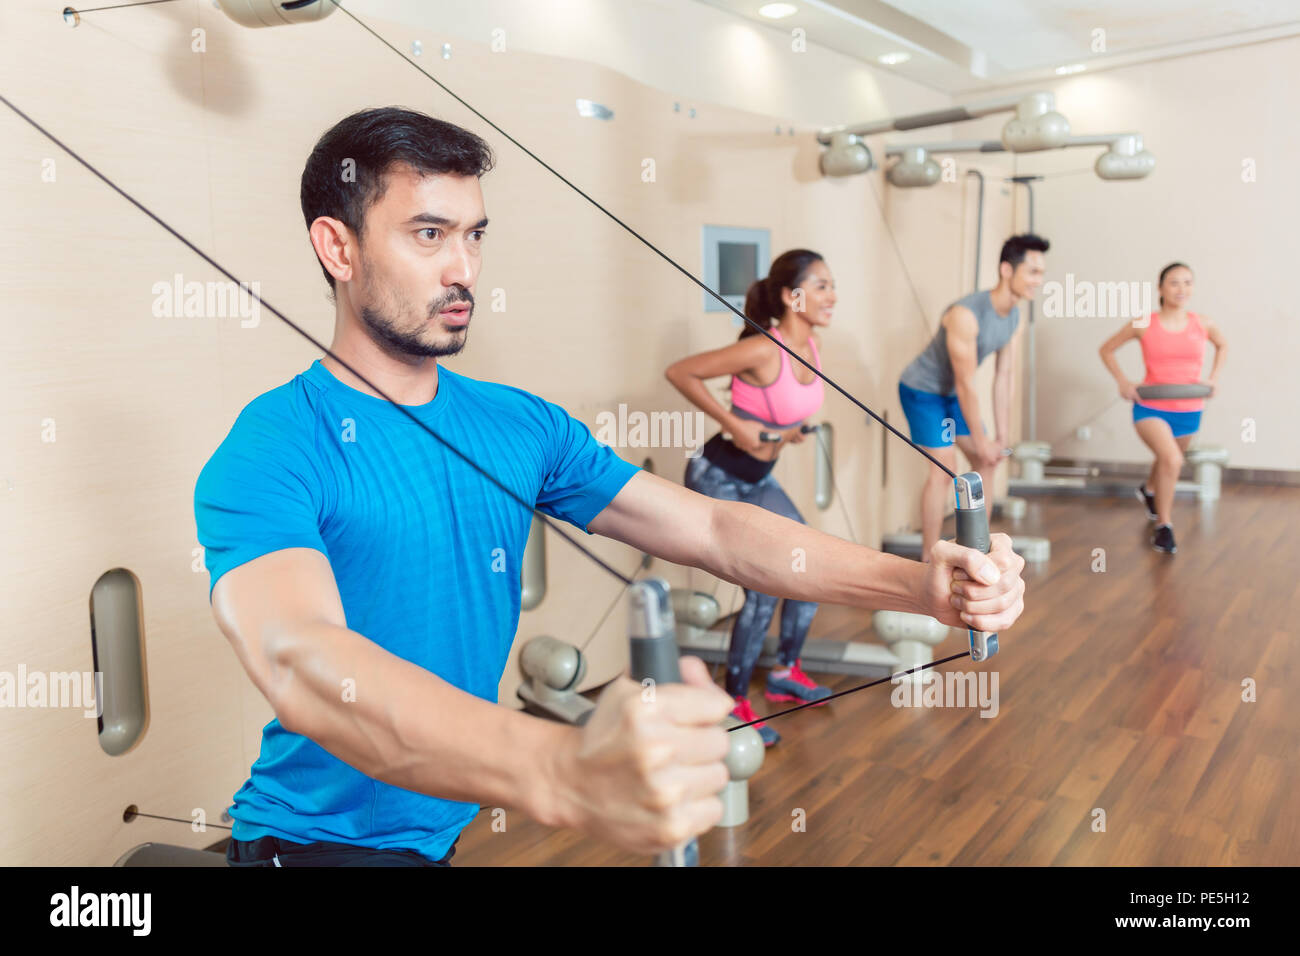 Determined young man exercising with resistance bands Stock Photo